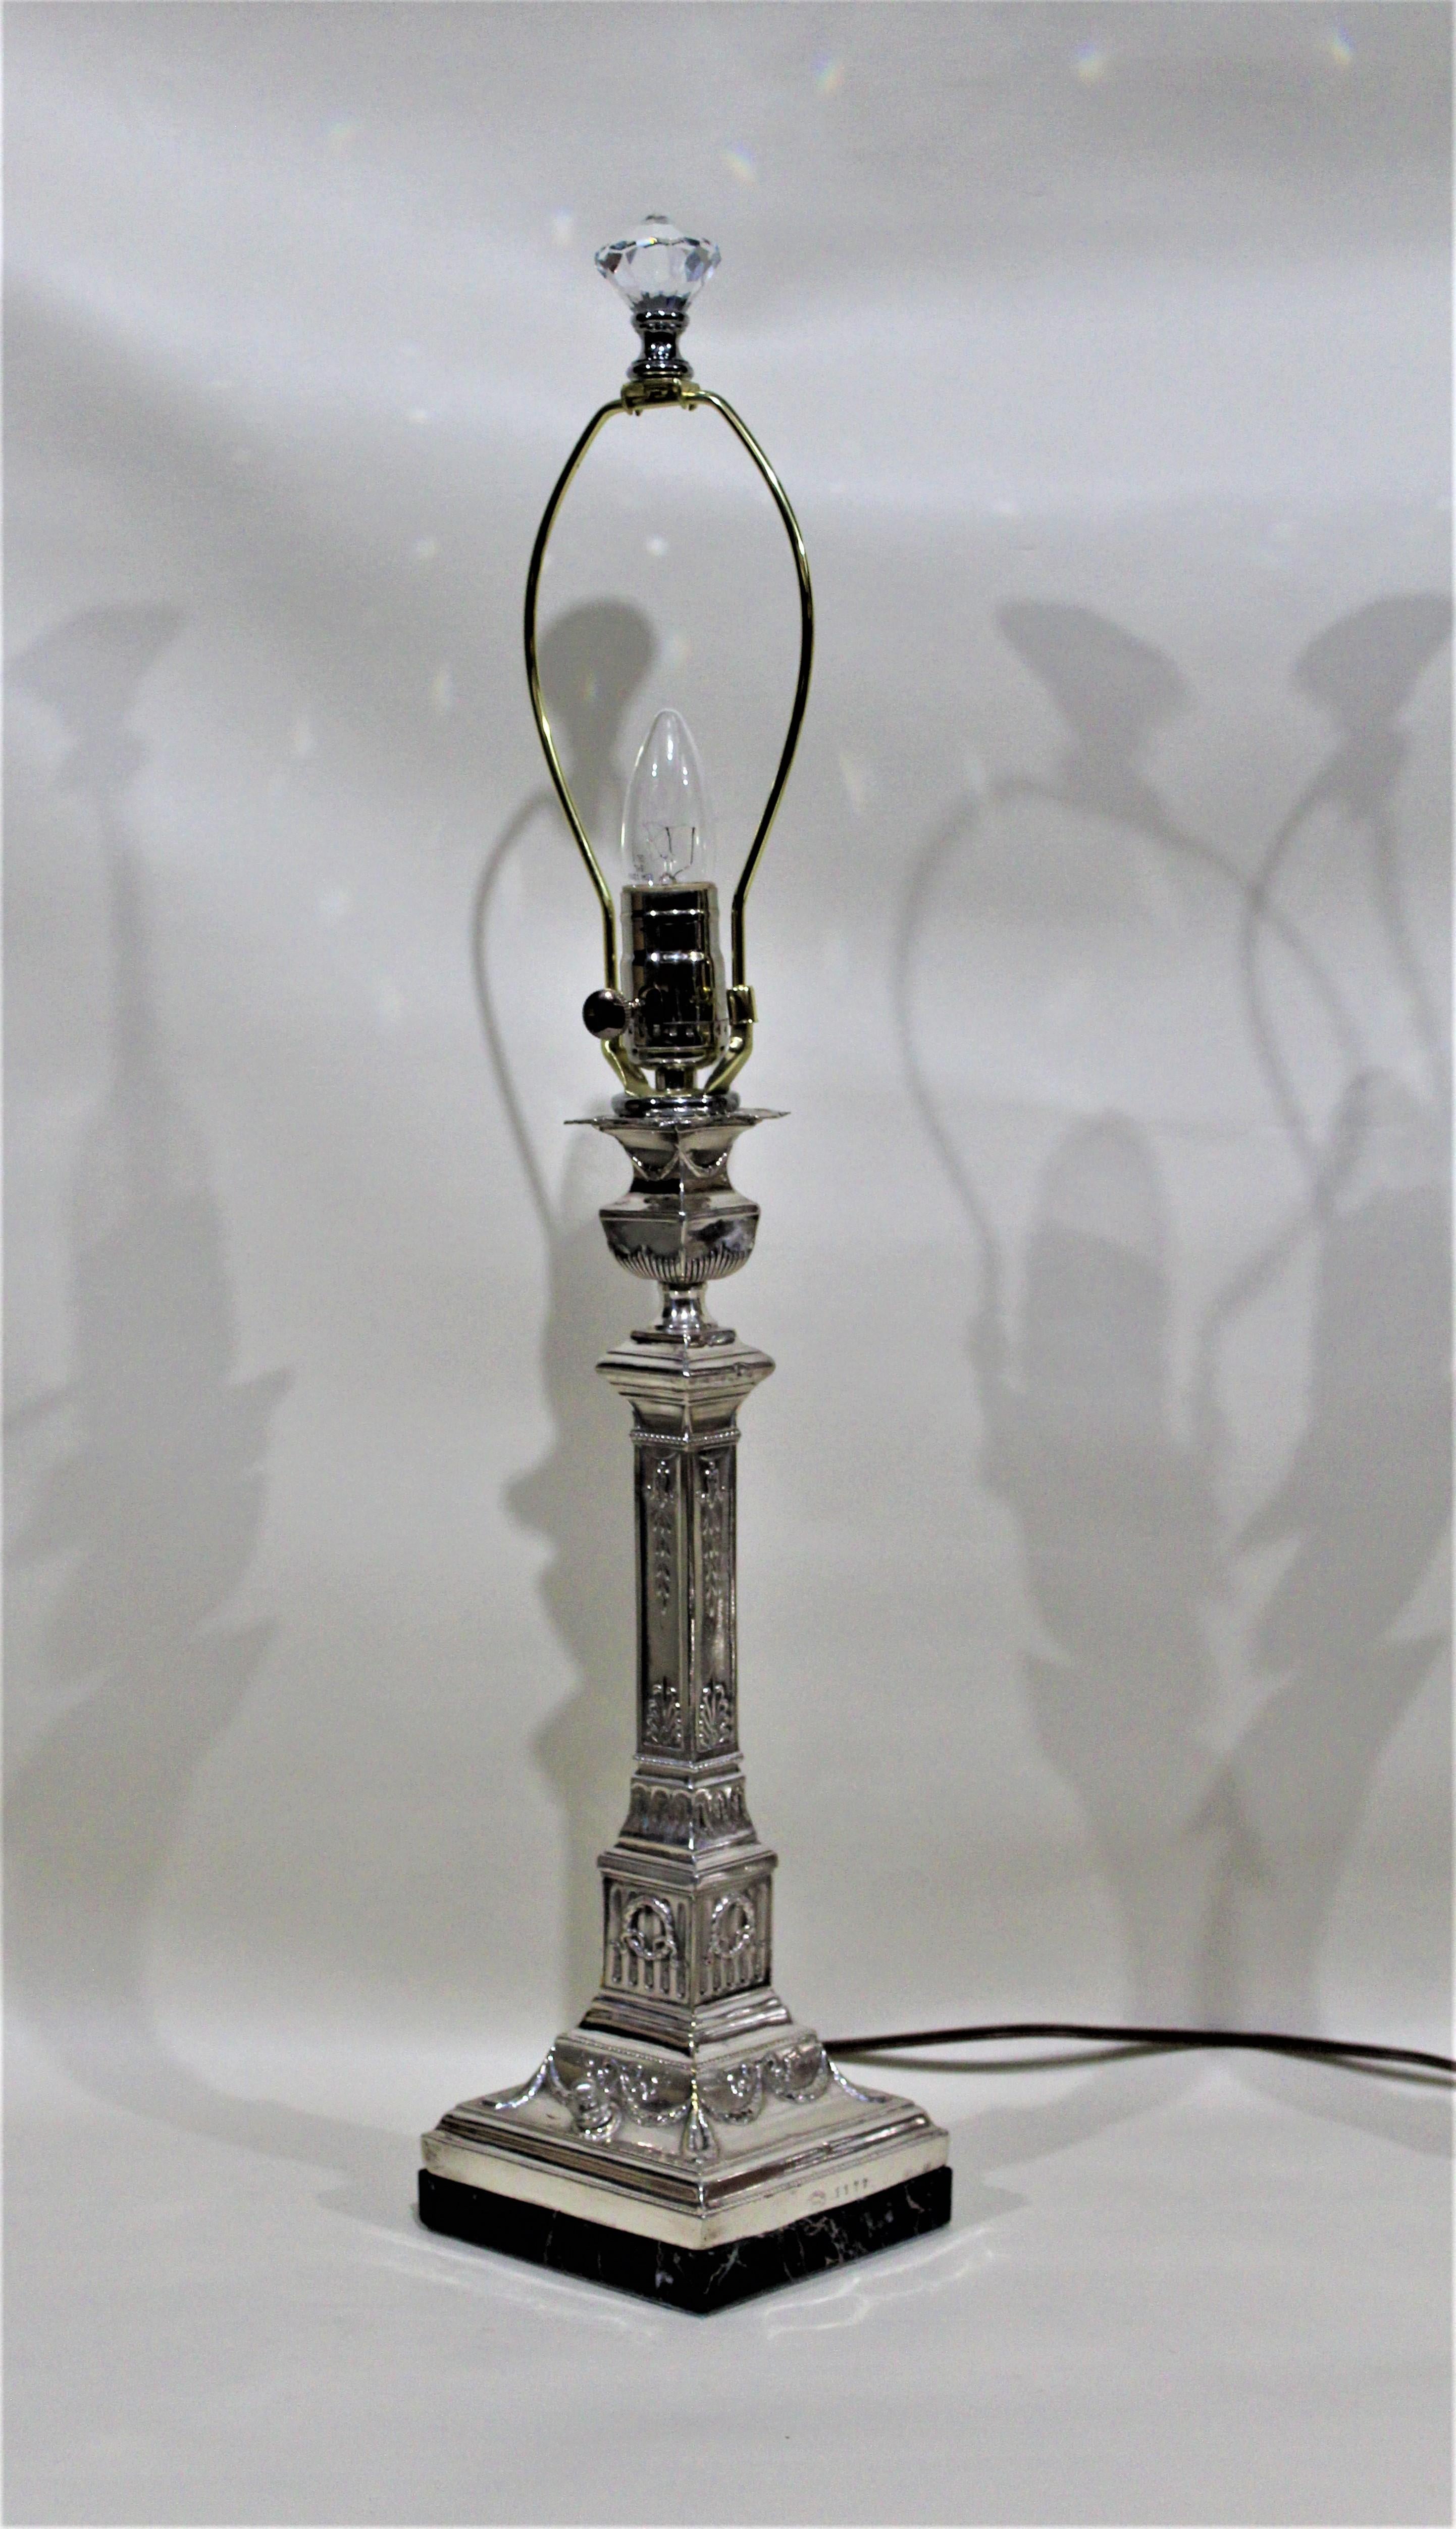 Polish Pair of Antique Silver Plated Converted Candlestick Lamps J. Ehrlich, Poland